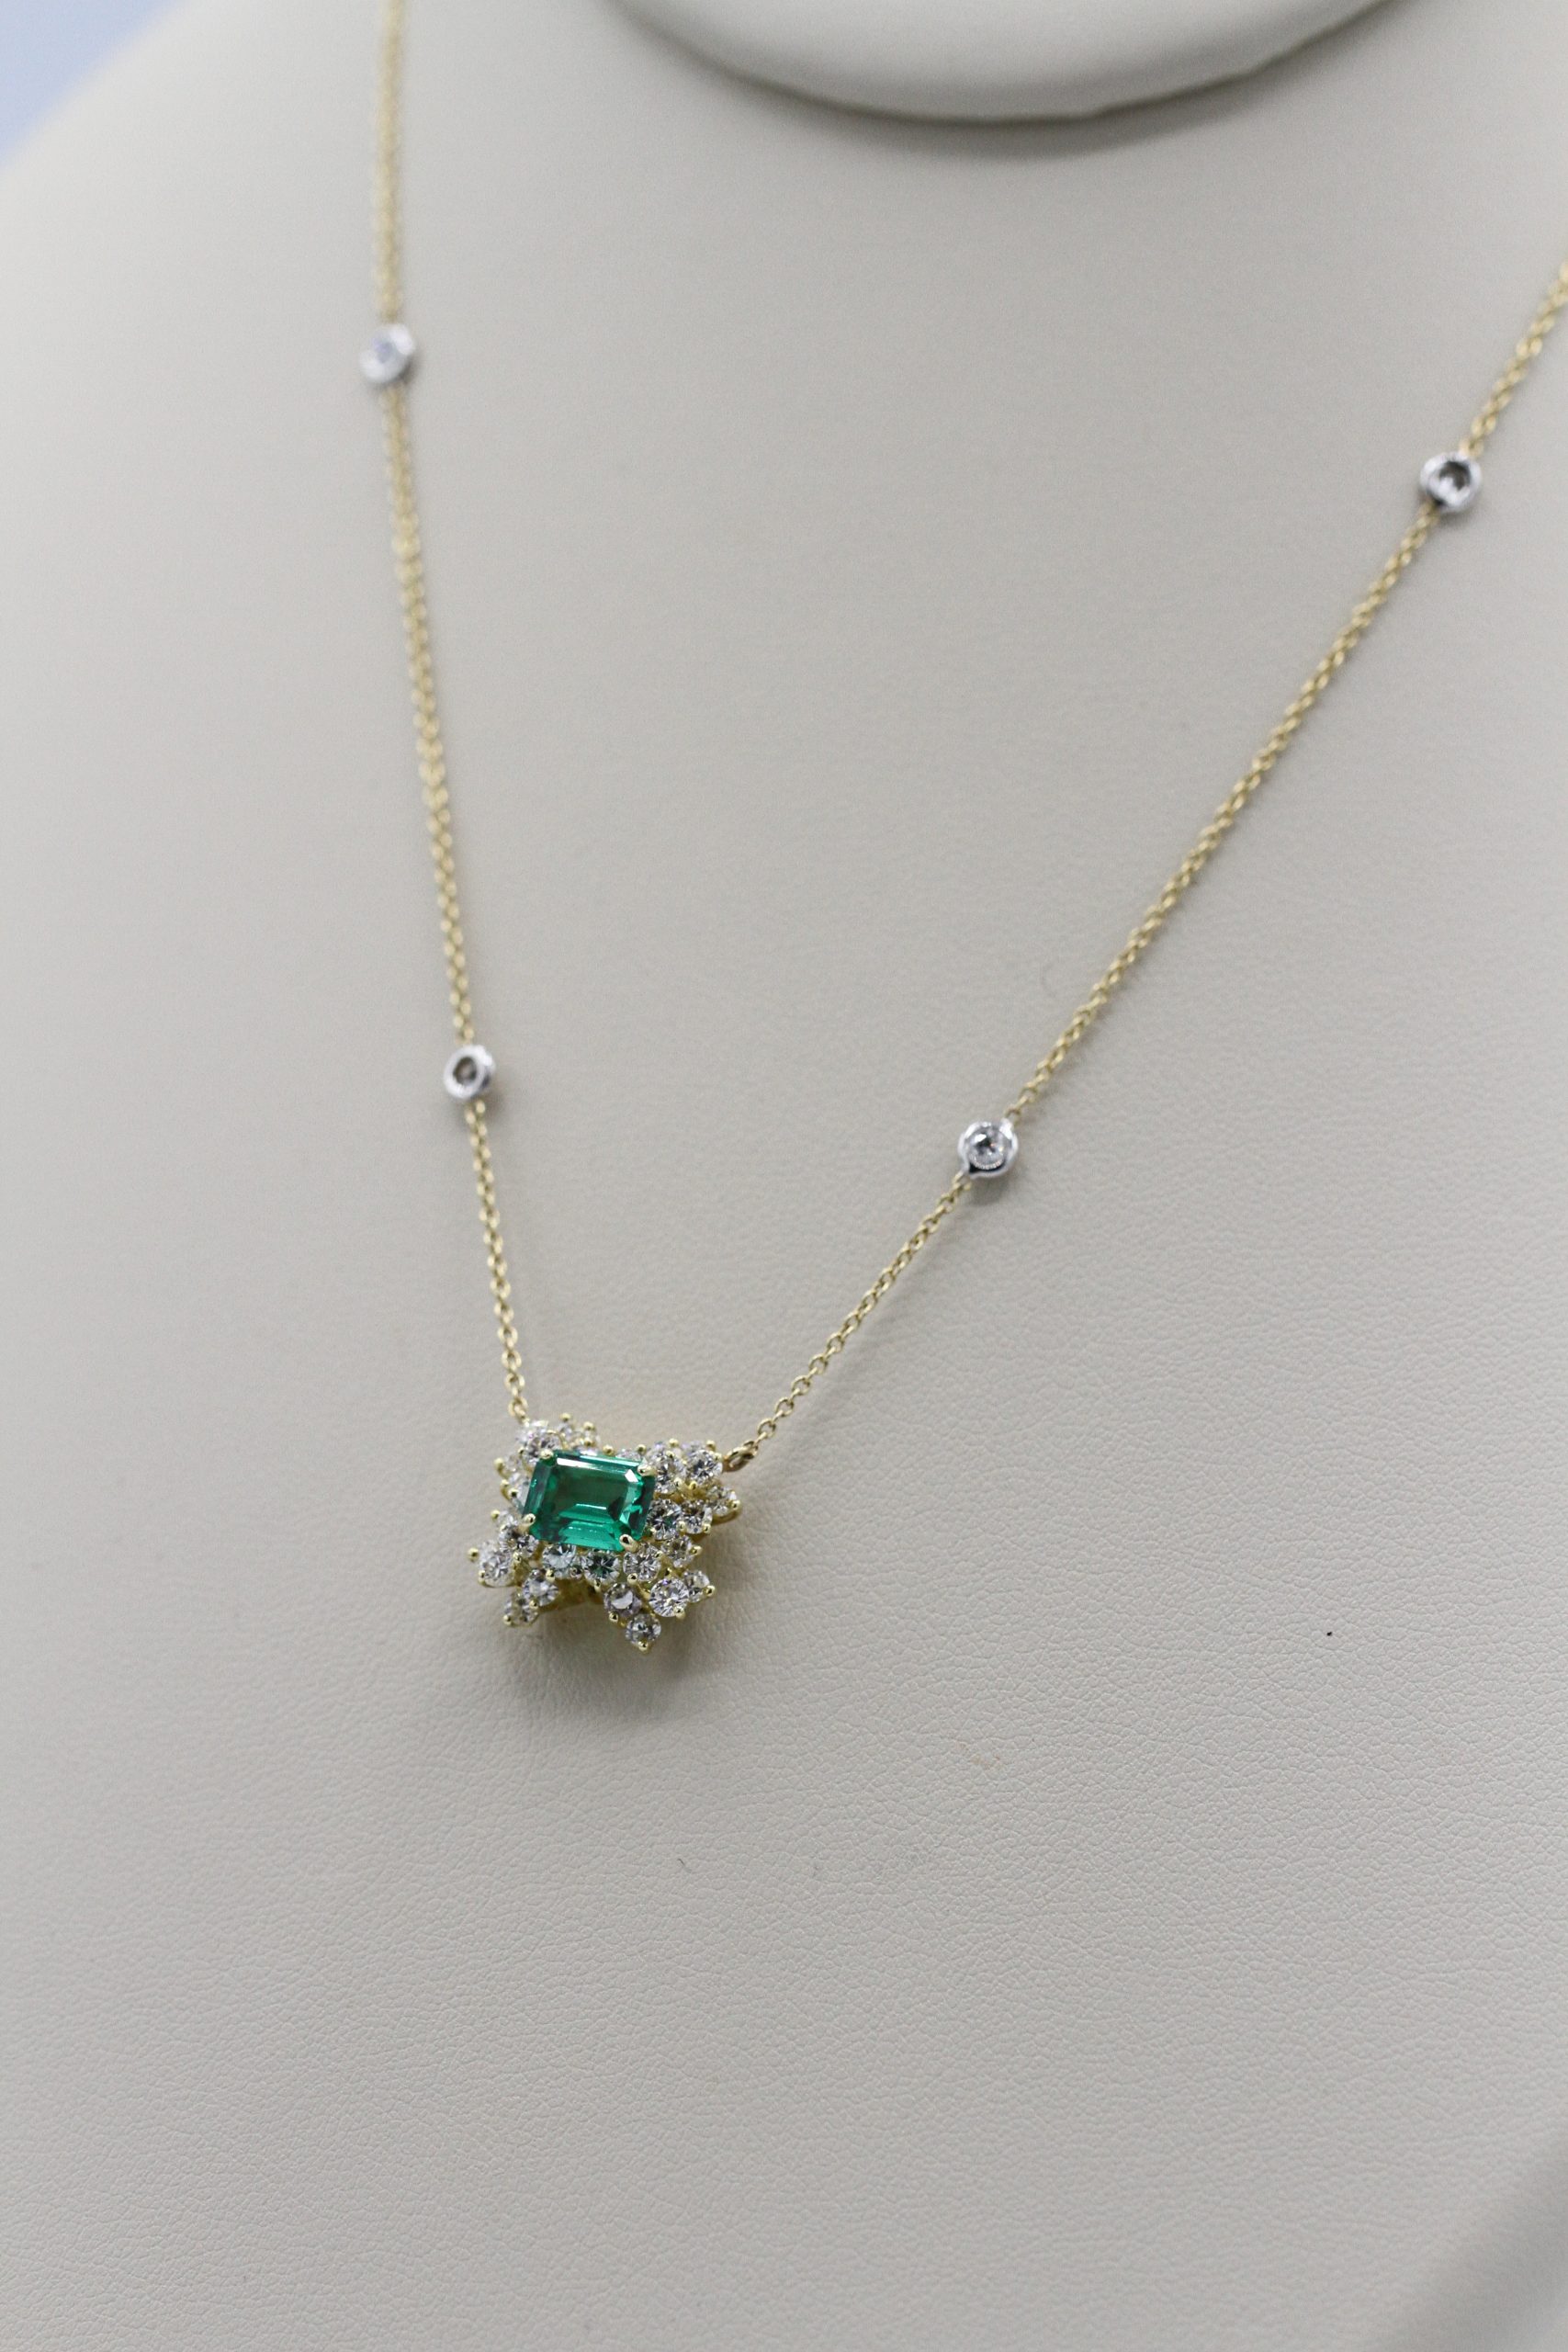 An ornate gold, emerald, and diamond necklace